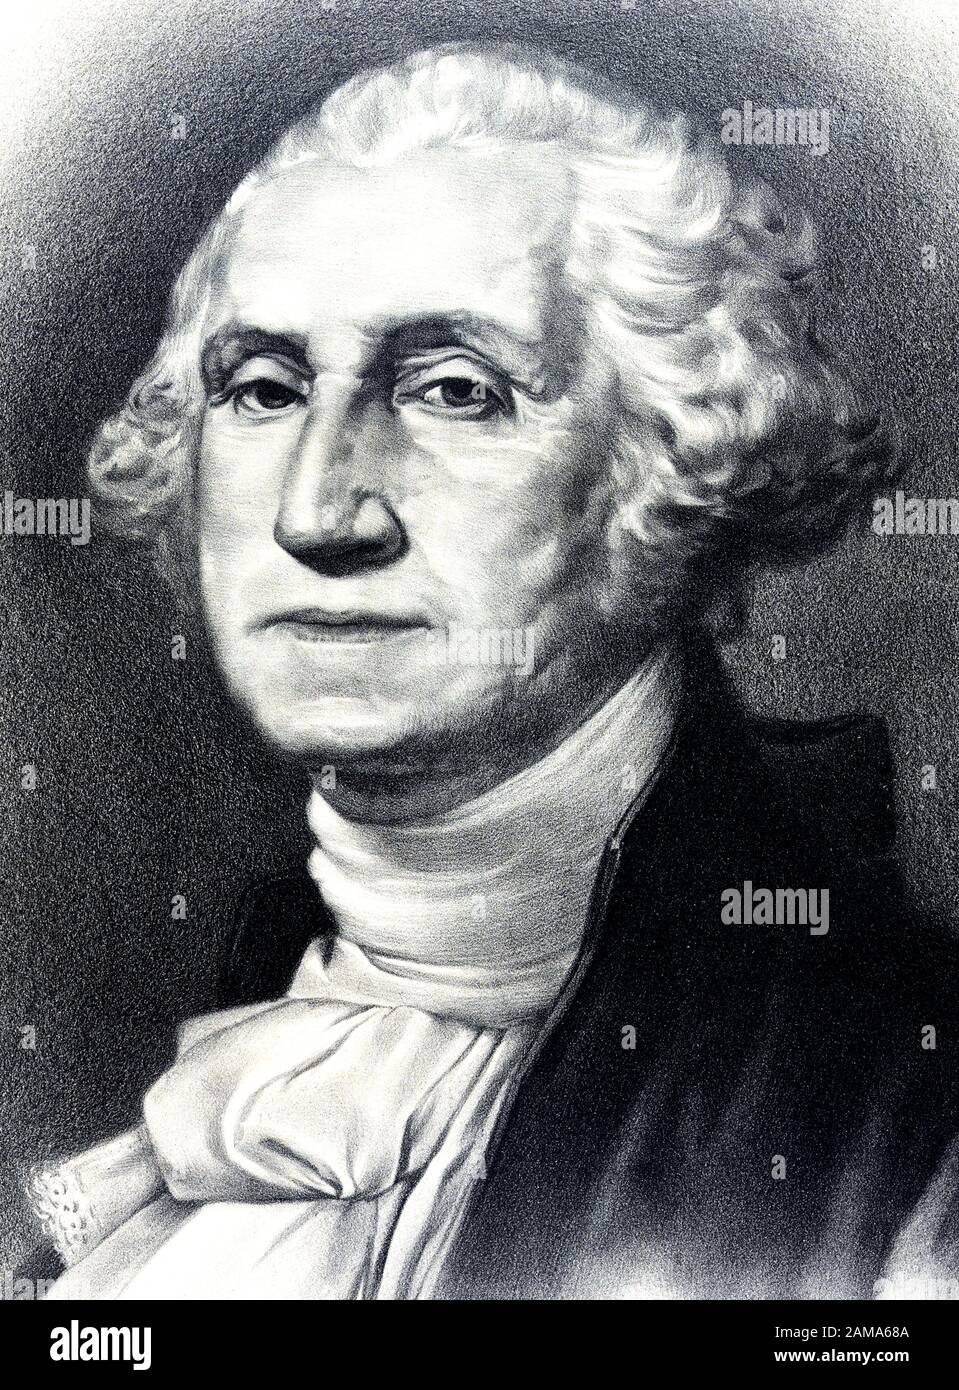 Vintage portrait of George Washington (1732 - 1799) – Commander of the Continental Army in the American Revolutionary War / War of Independence (1775 – 1783) and the first US President (1789 - 1797). Print circa 1896 by E L Kellogg & Co of New York and Chicago and entitled 'Father of his Country'. Stock Photo